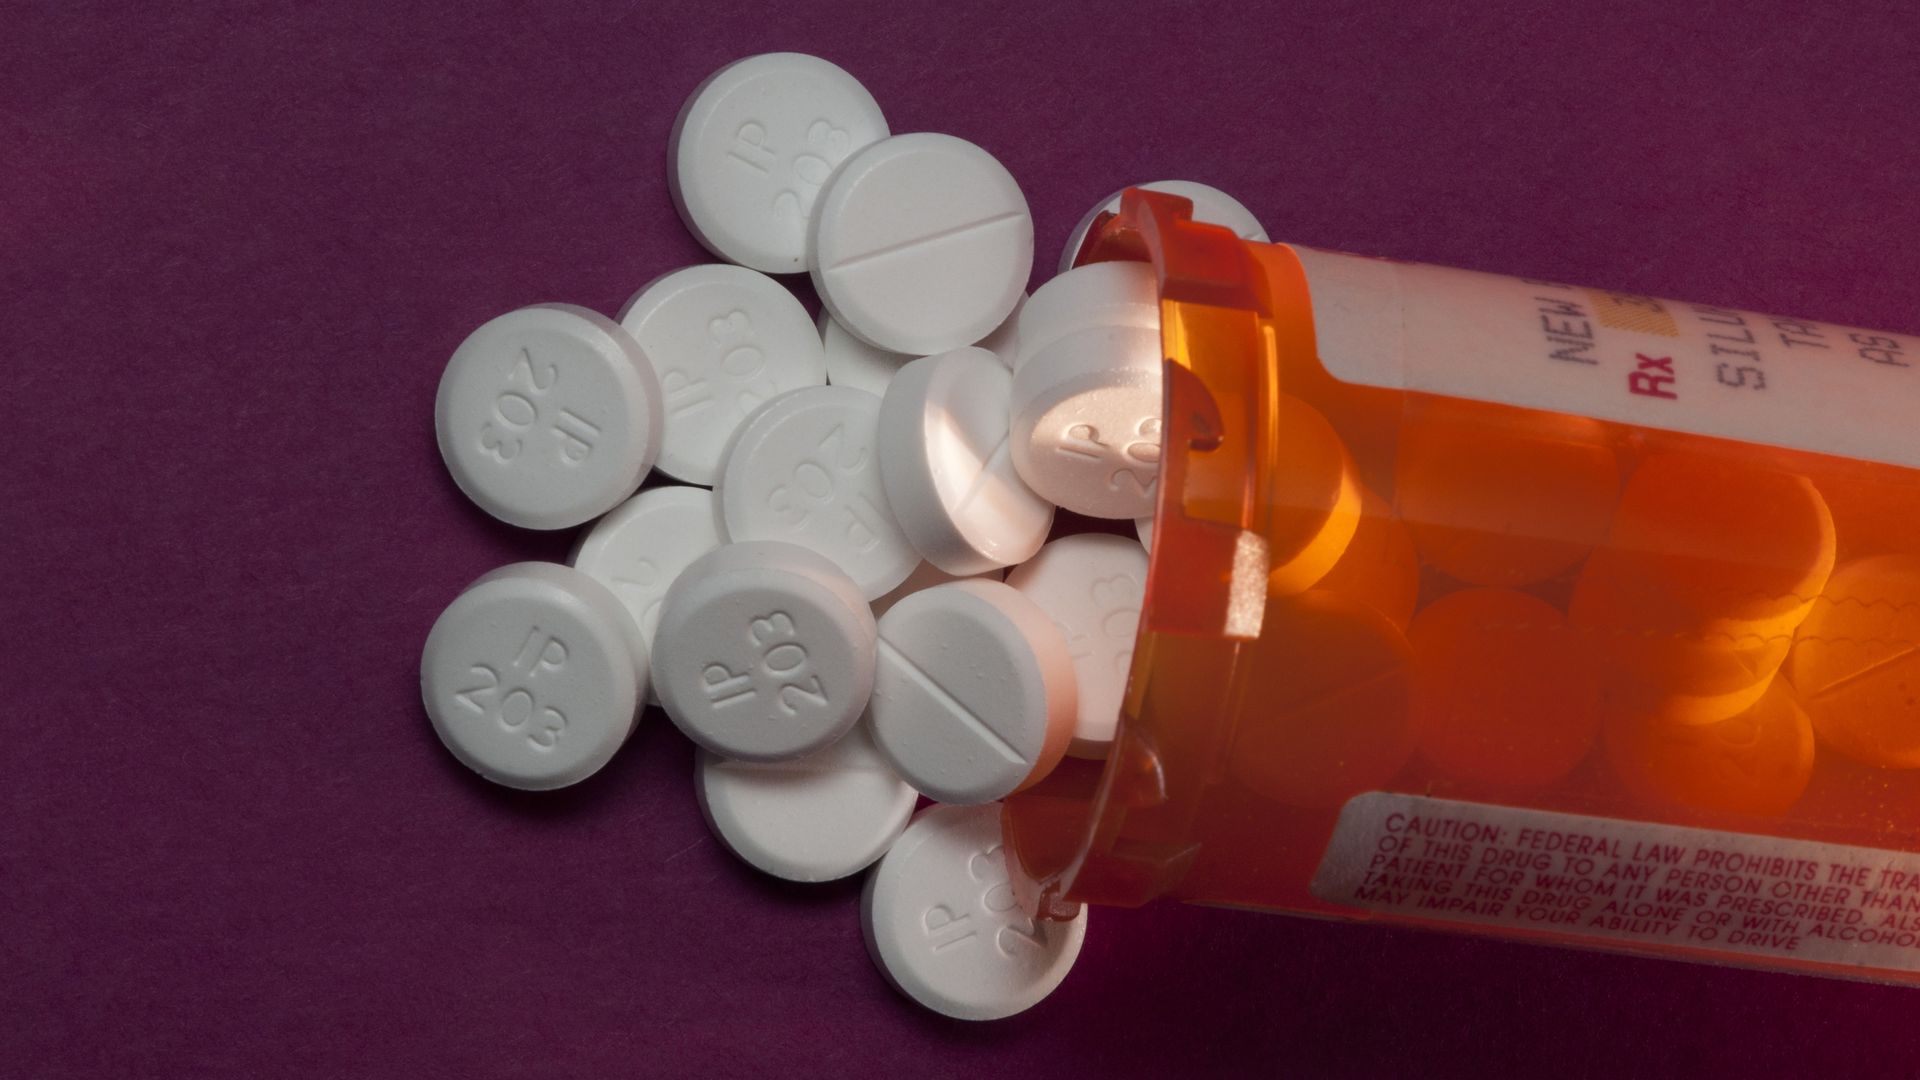 In this image, small round white oxycodone pills spill out of a prescription bottle 